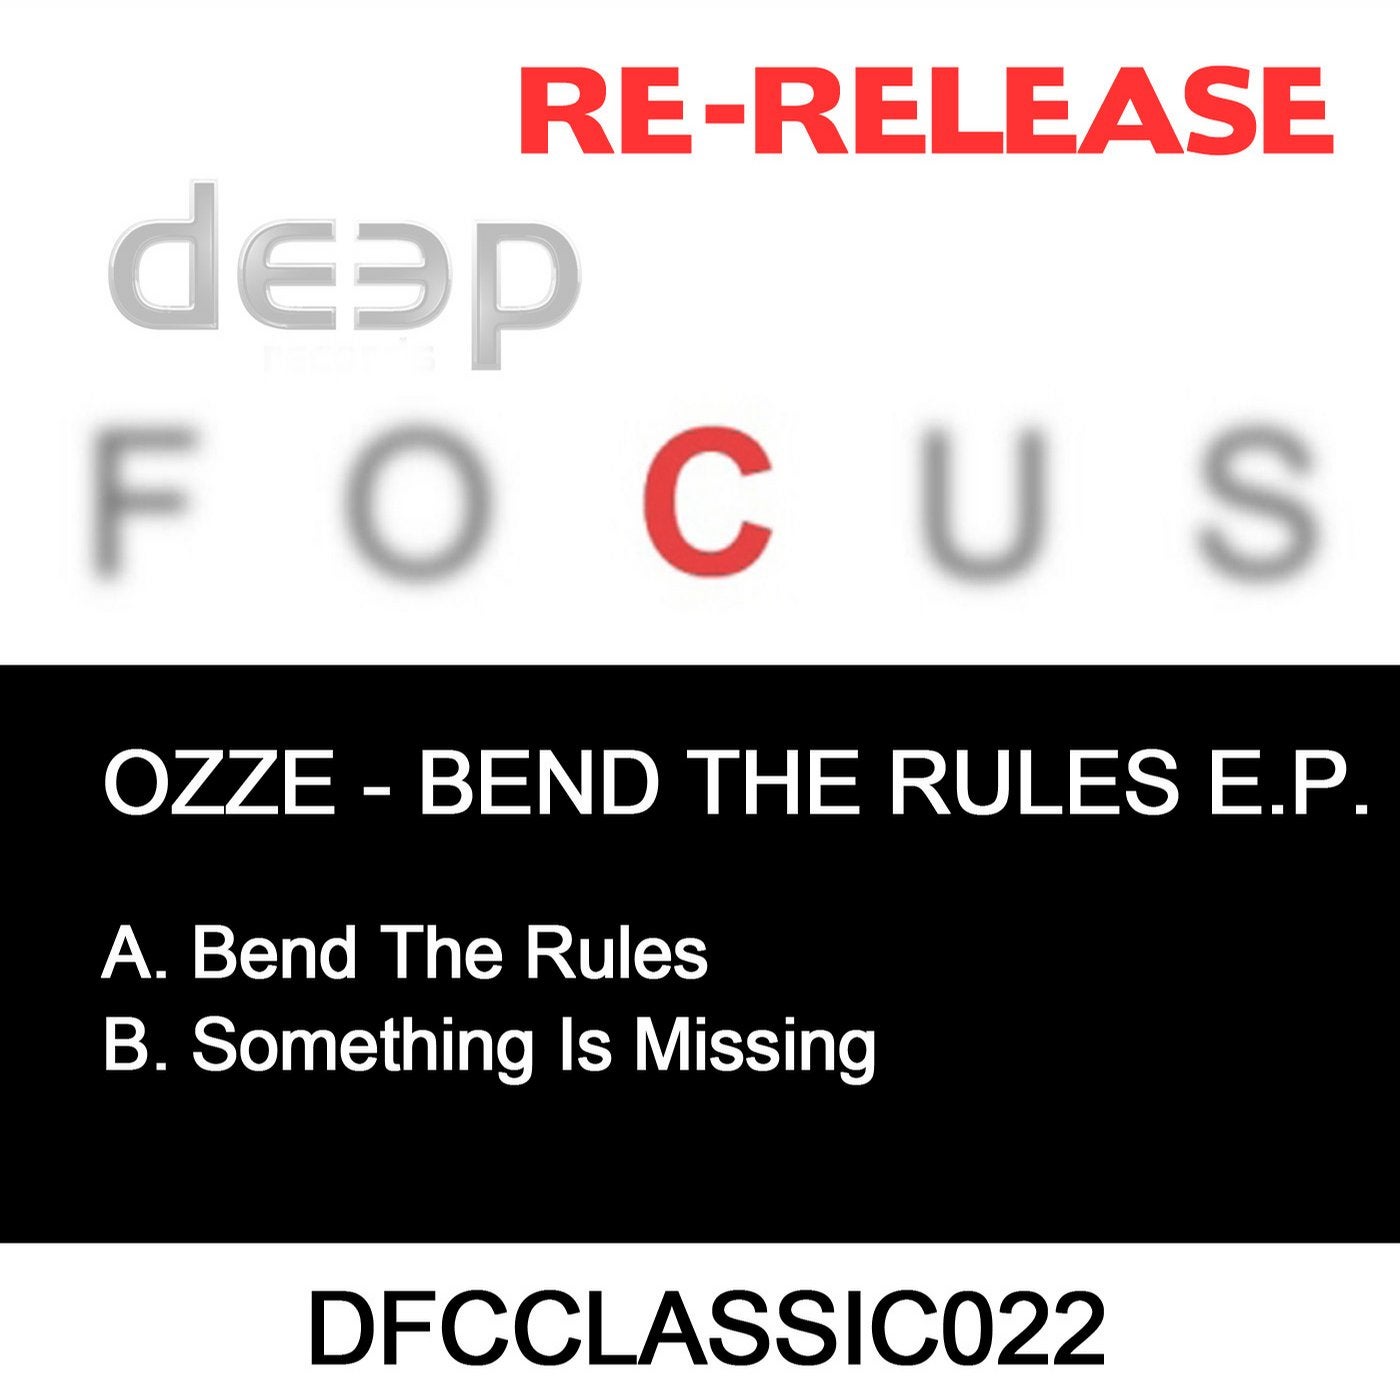 Bend The Rules EP